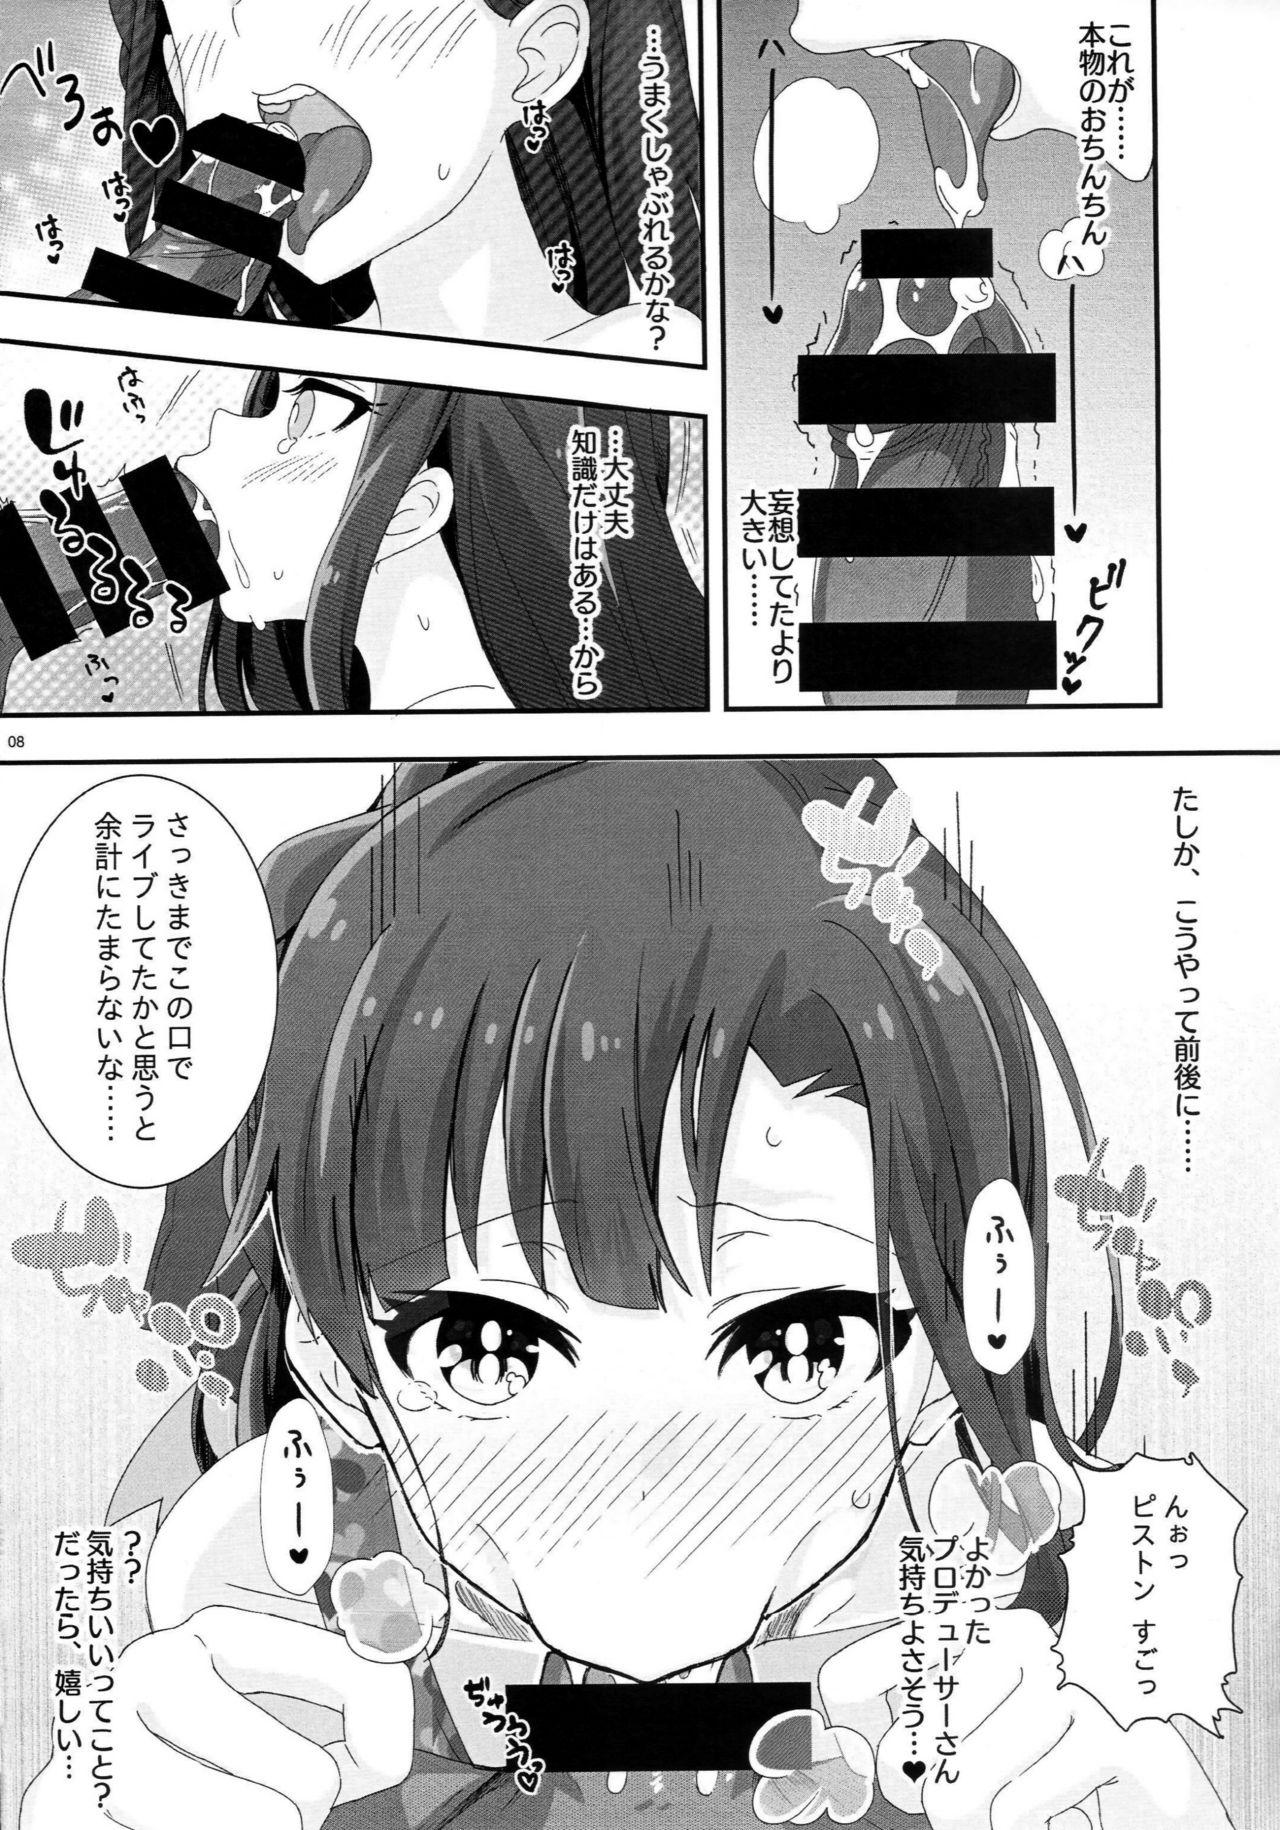 Kiss Lovemutagens. - The idolmaster Solo Girl - Page 7